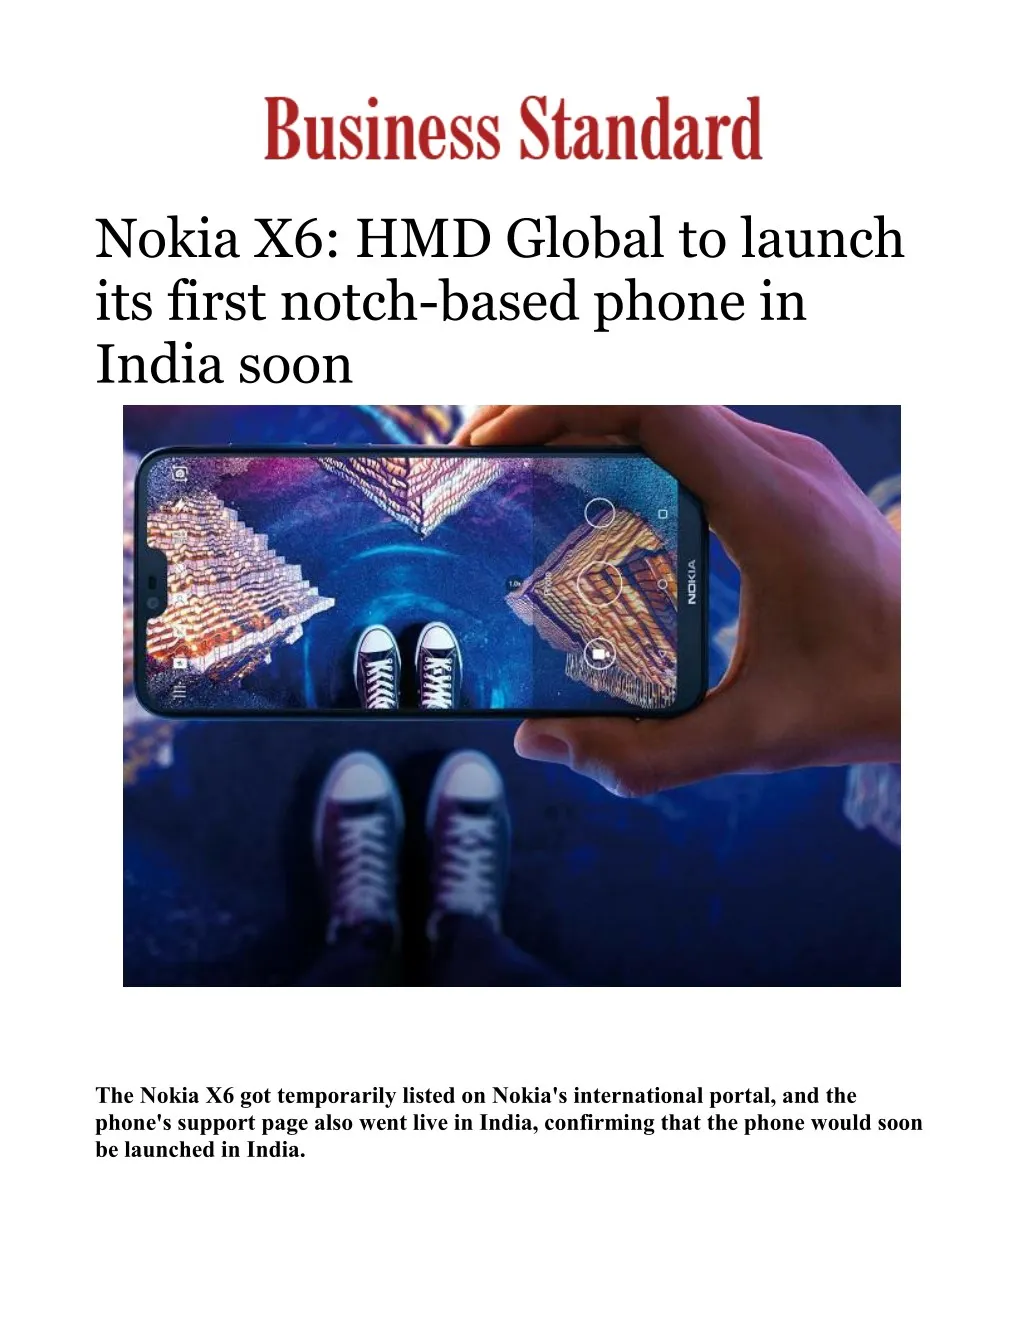 nokia x6 hmd global to launch its first notch